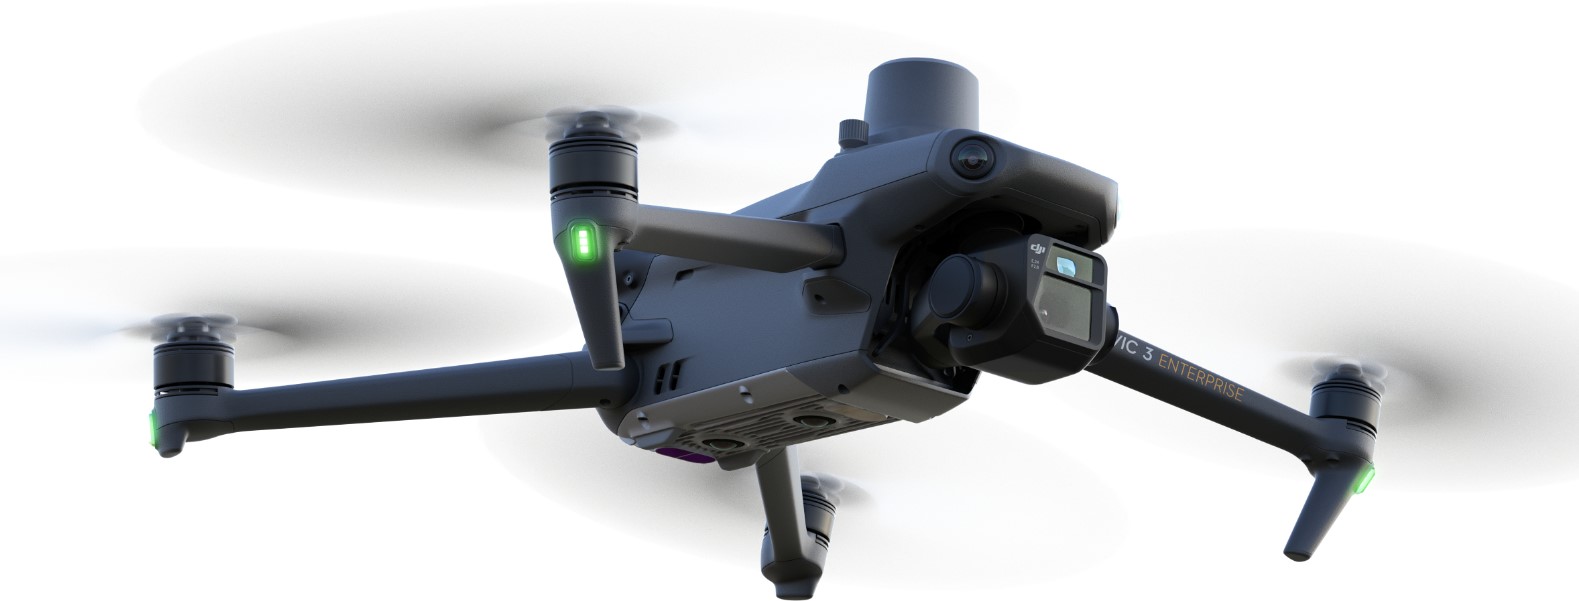 Get the DJI MAVIC 3 Enterprise Drone, your everyday commercial drone